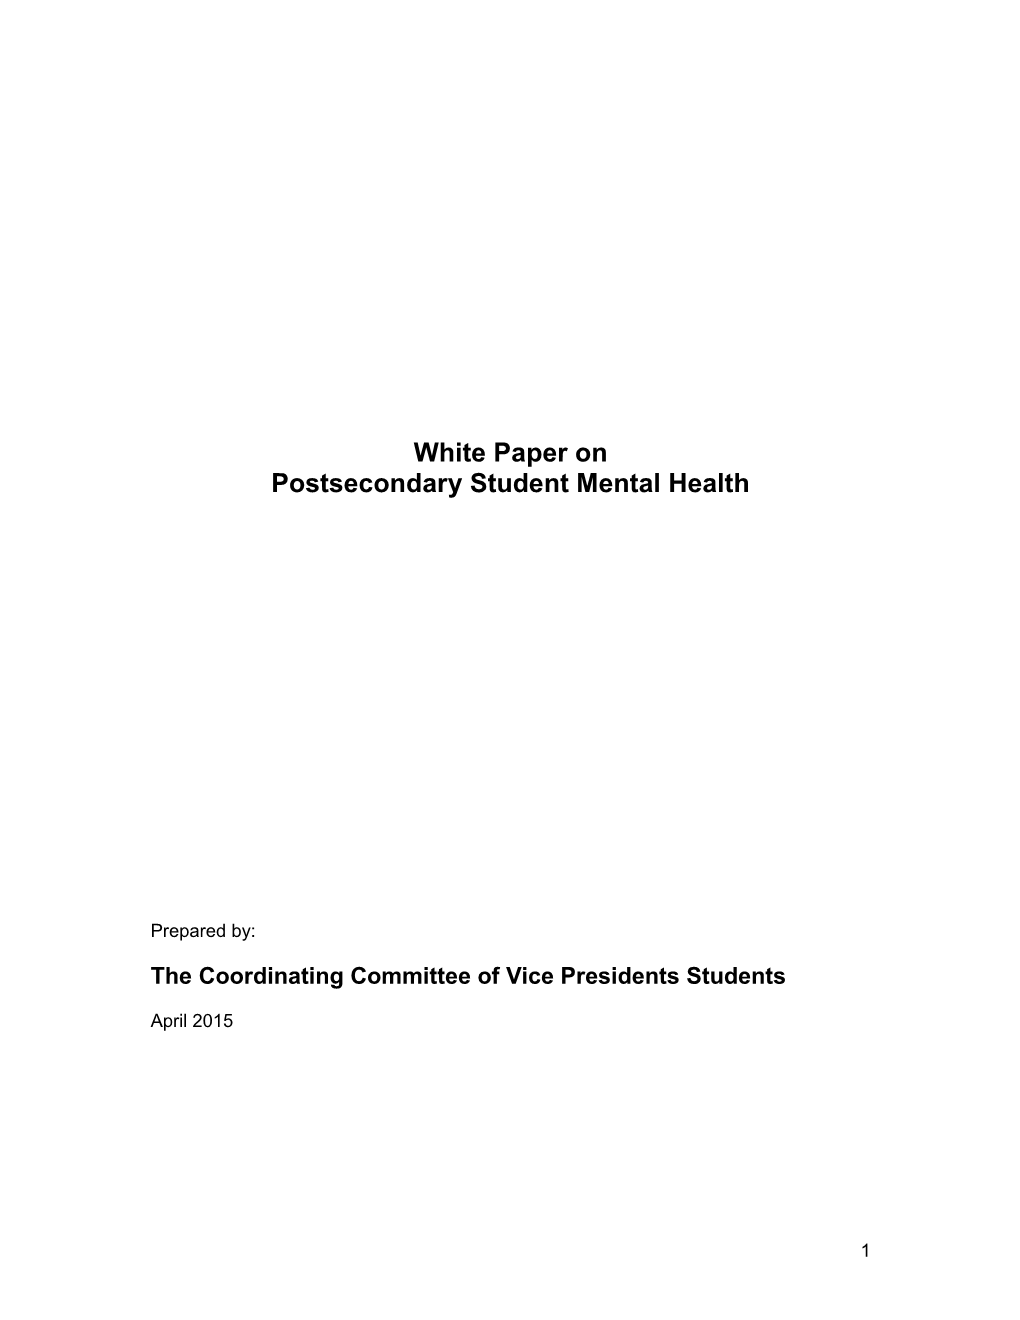 2015 CCVPS White Paper on Postsecondary Student Mental Health